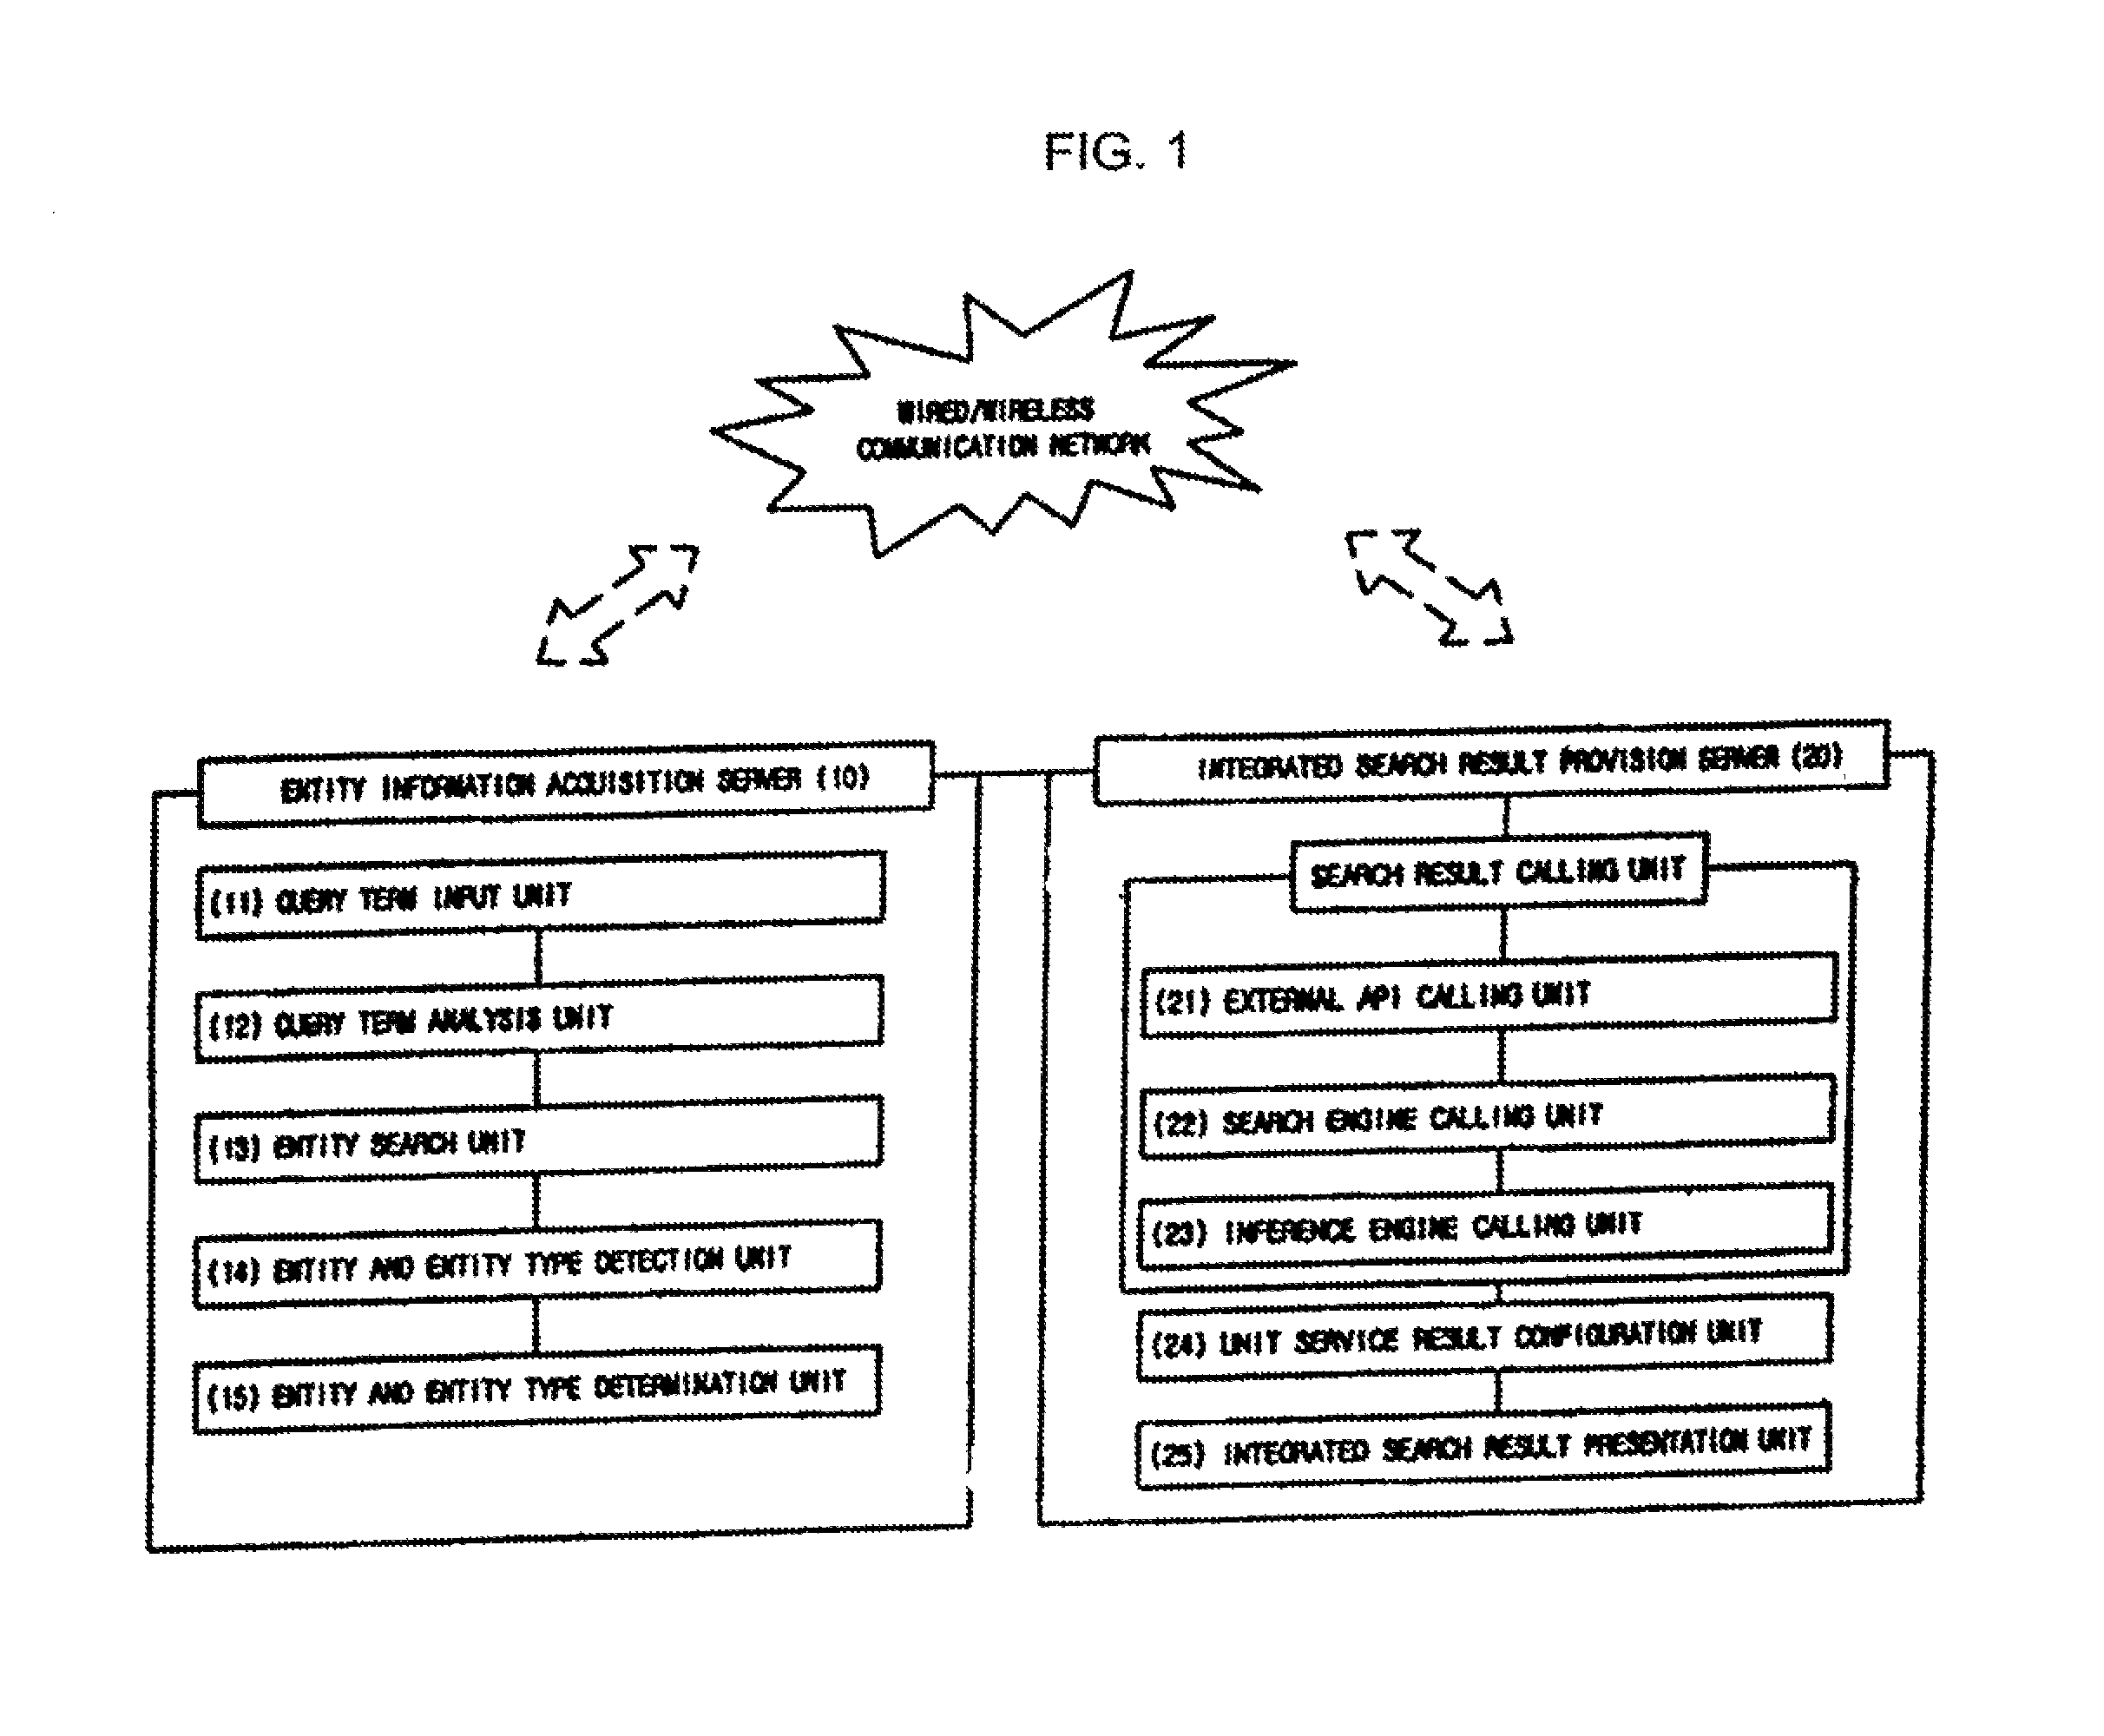 Multi-entity-centric integrated search system and method